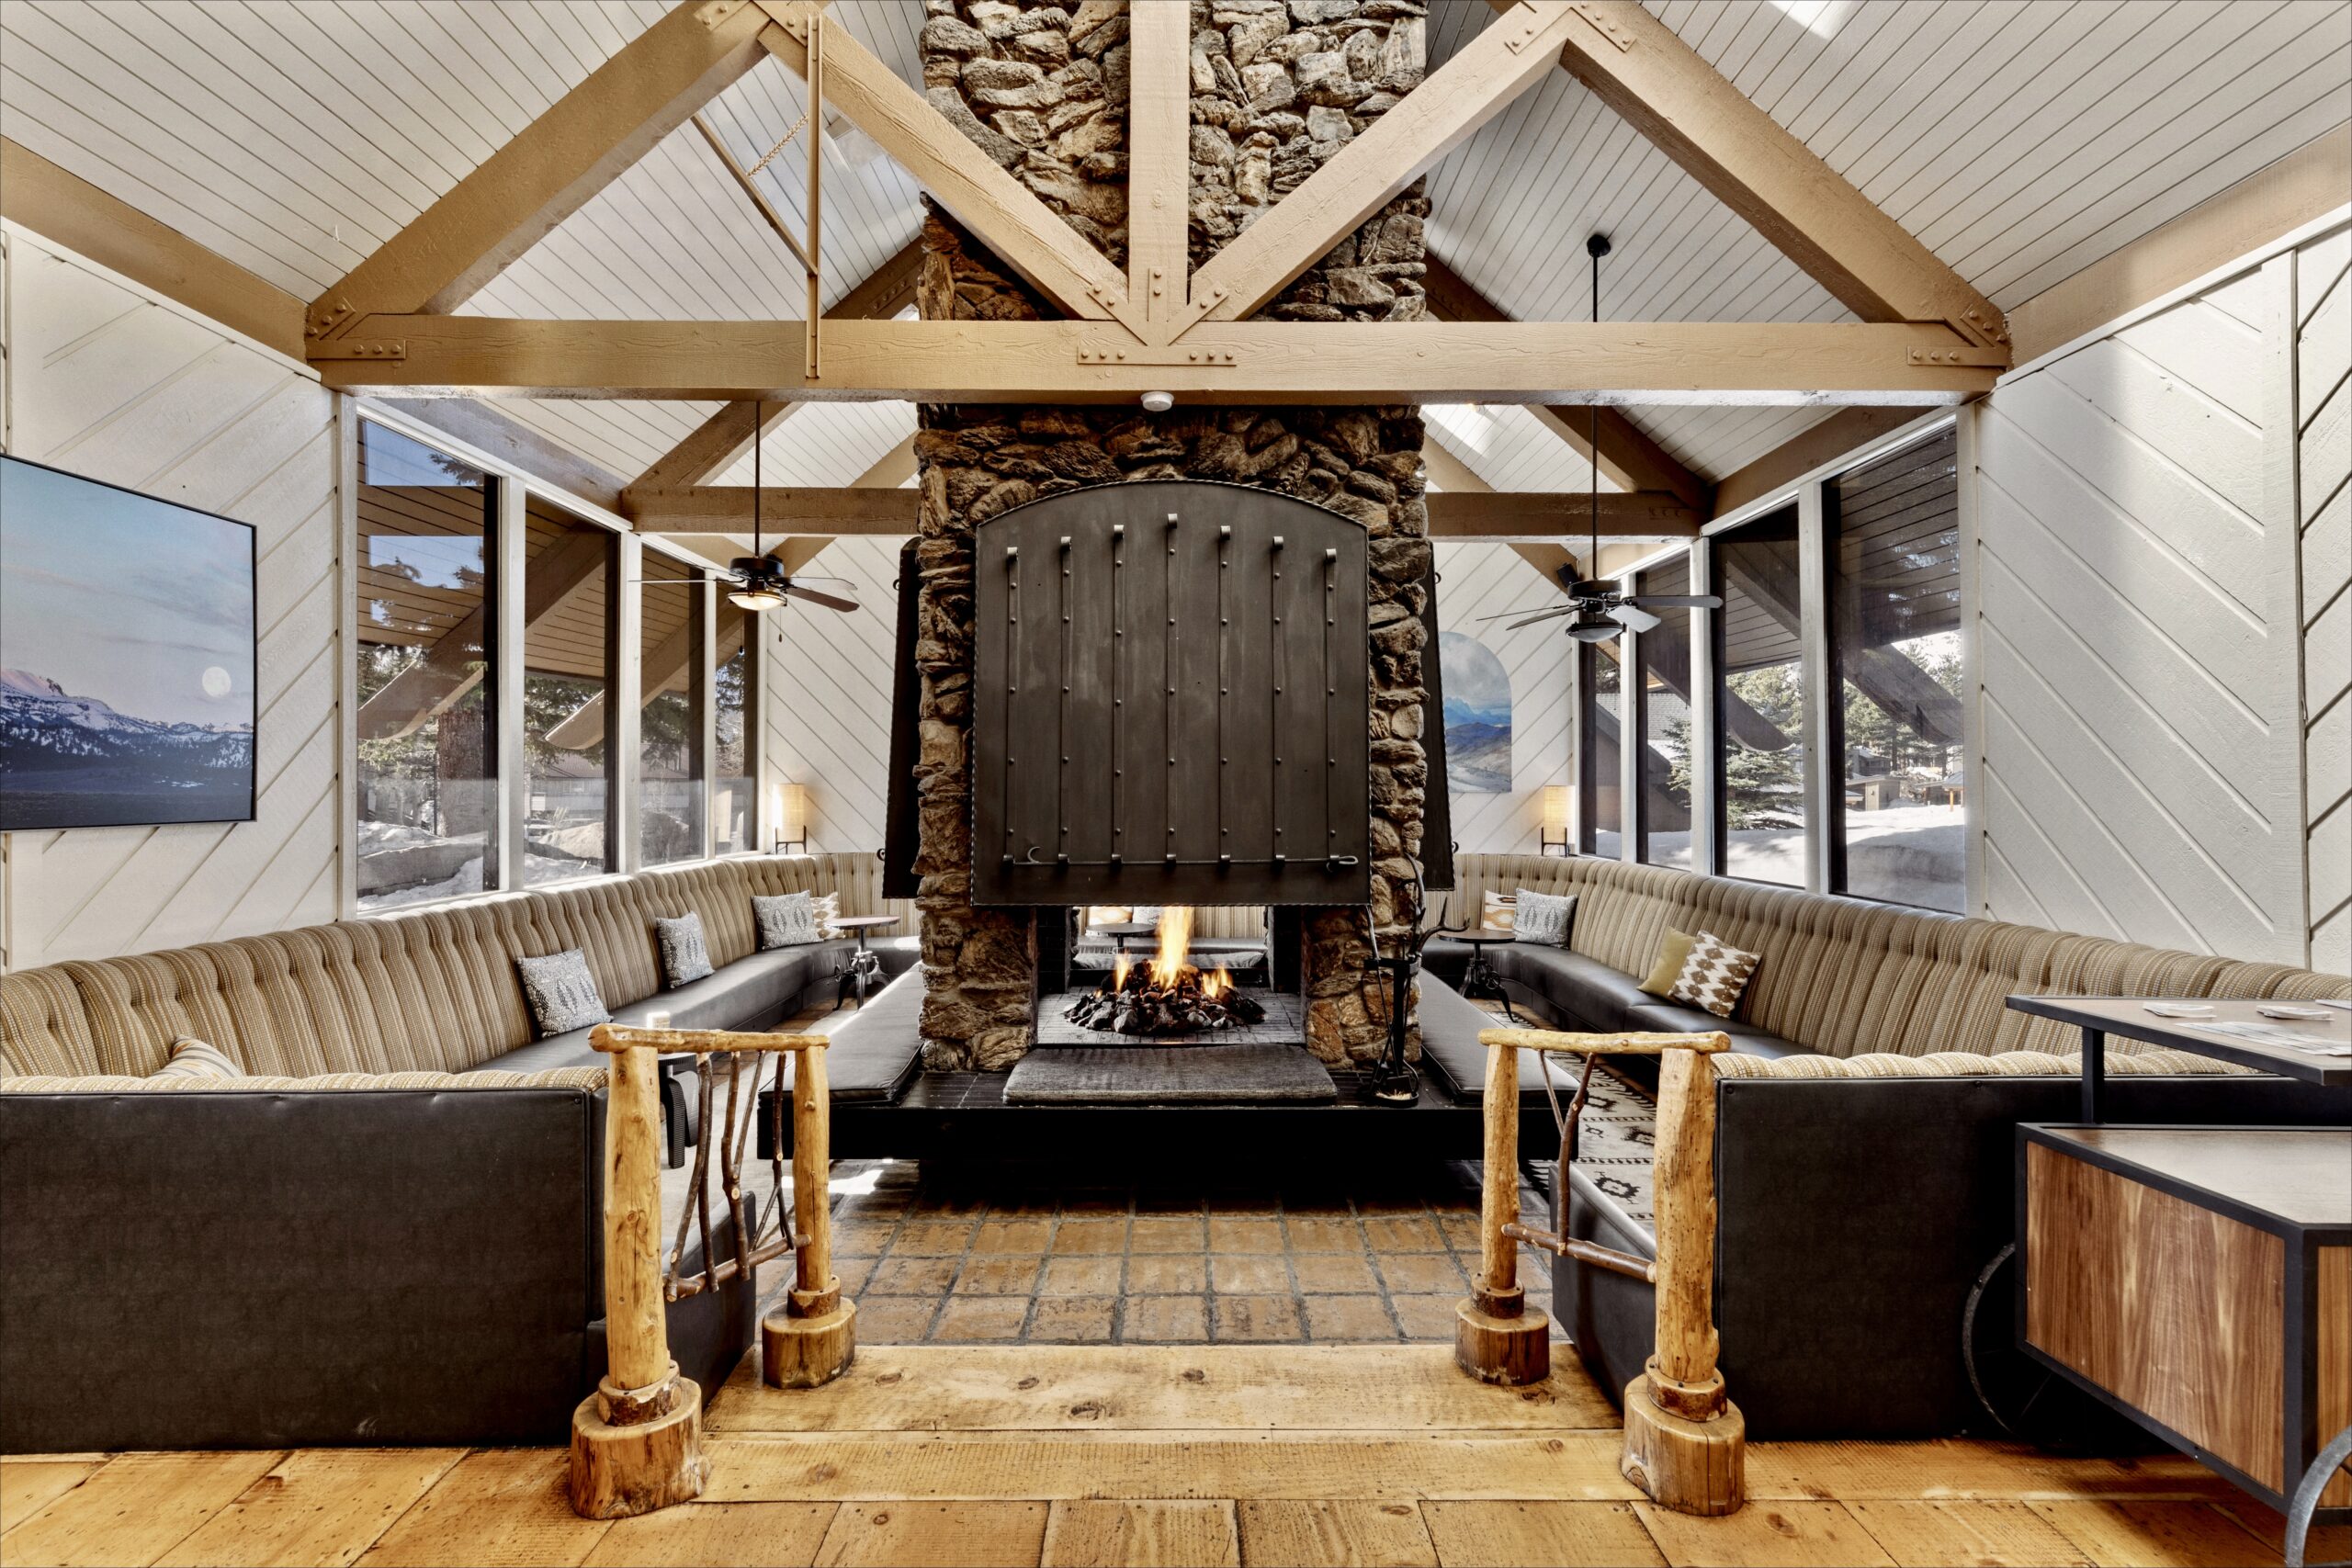 Cozy seating area perfectly arranged beside the warm fireplace for a comfortable ambiance.